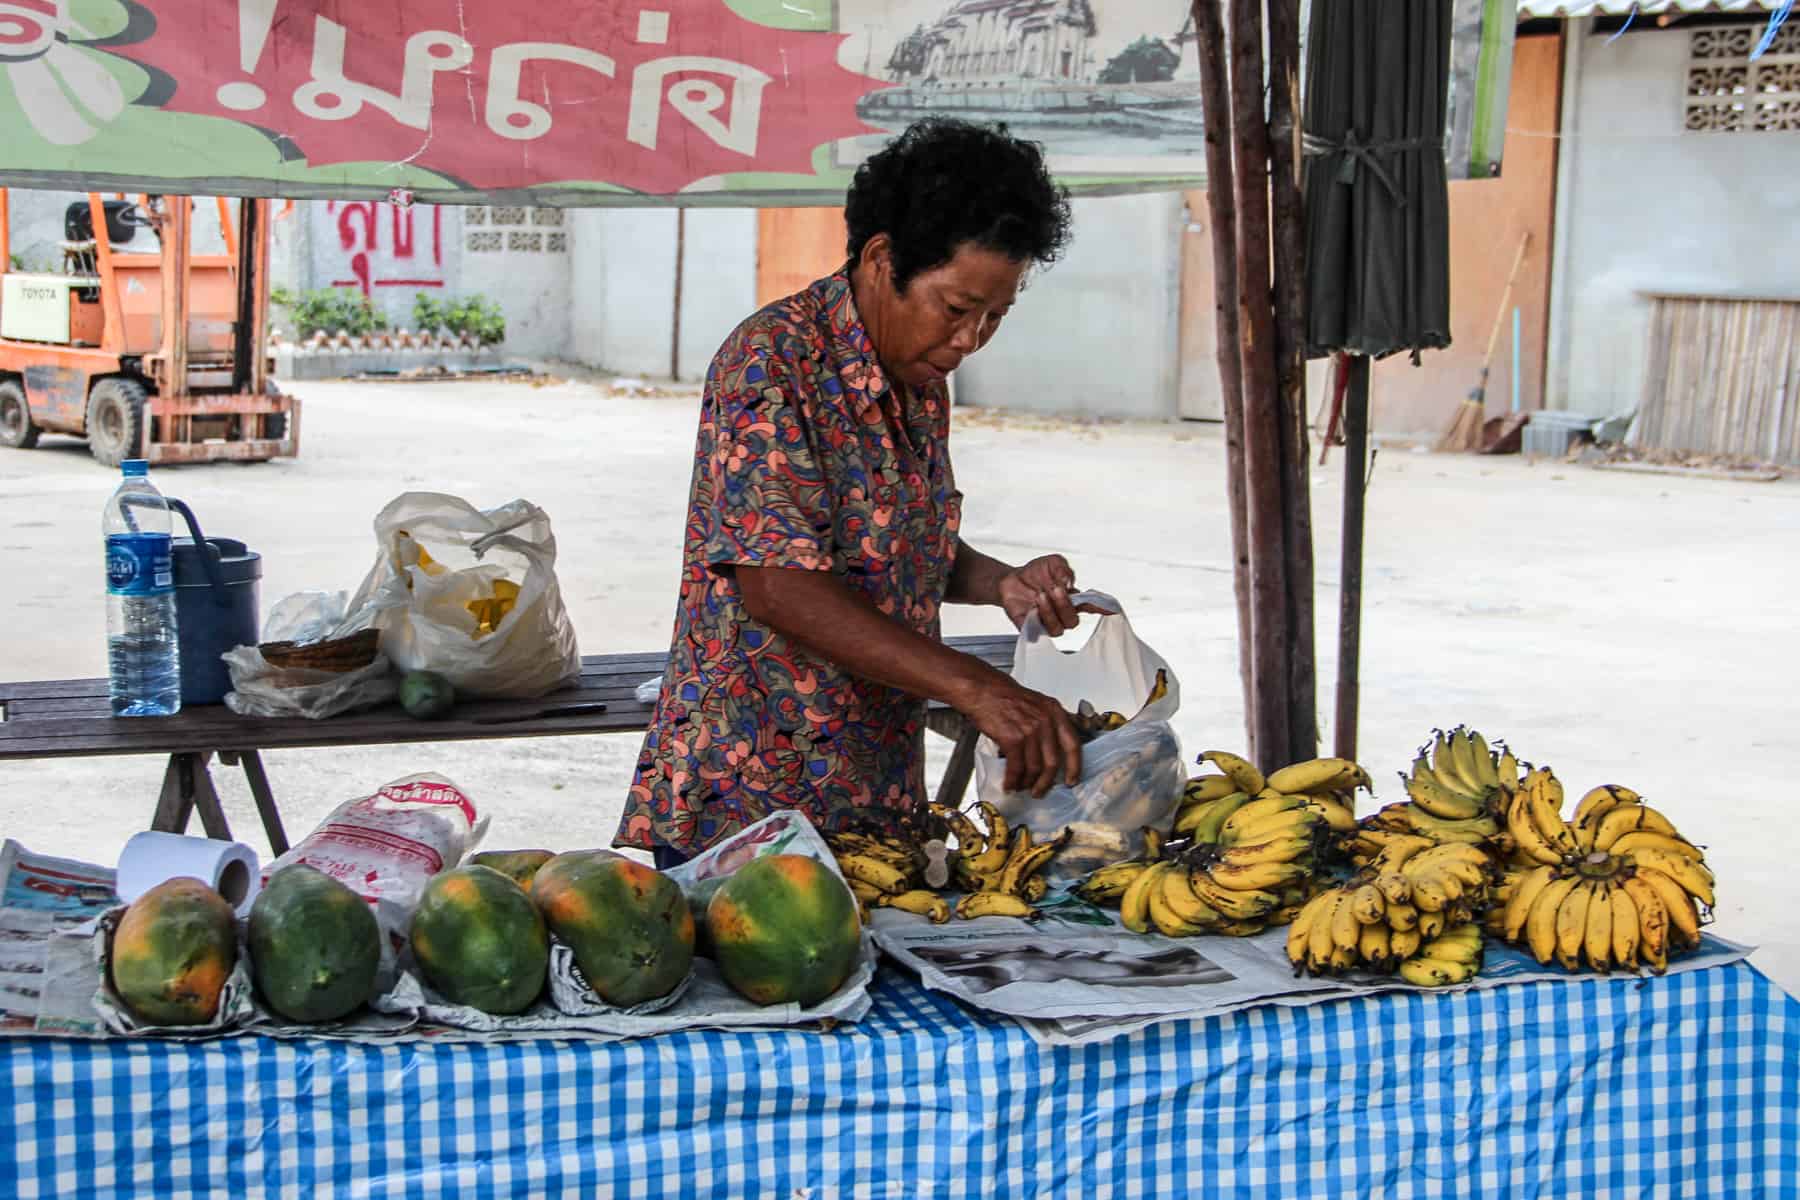 A Thai lady selling bananas and watermelons on a blue covered stall in Bangkok